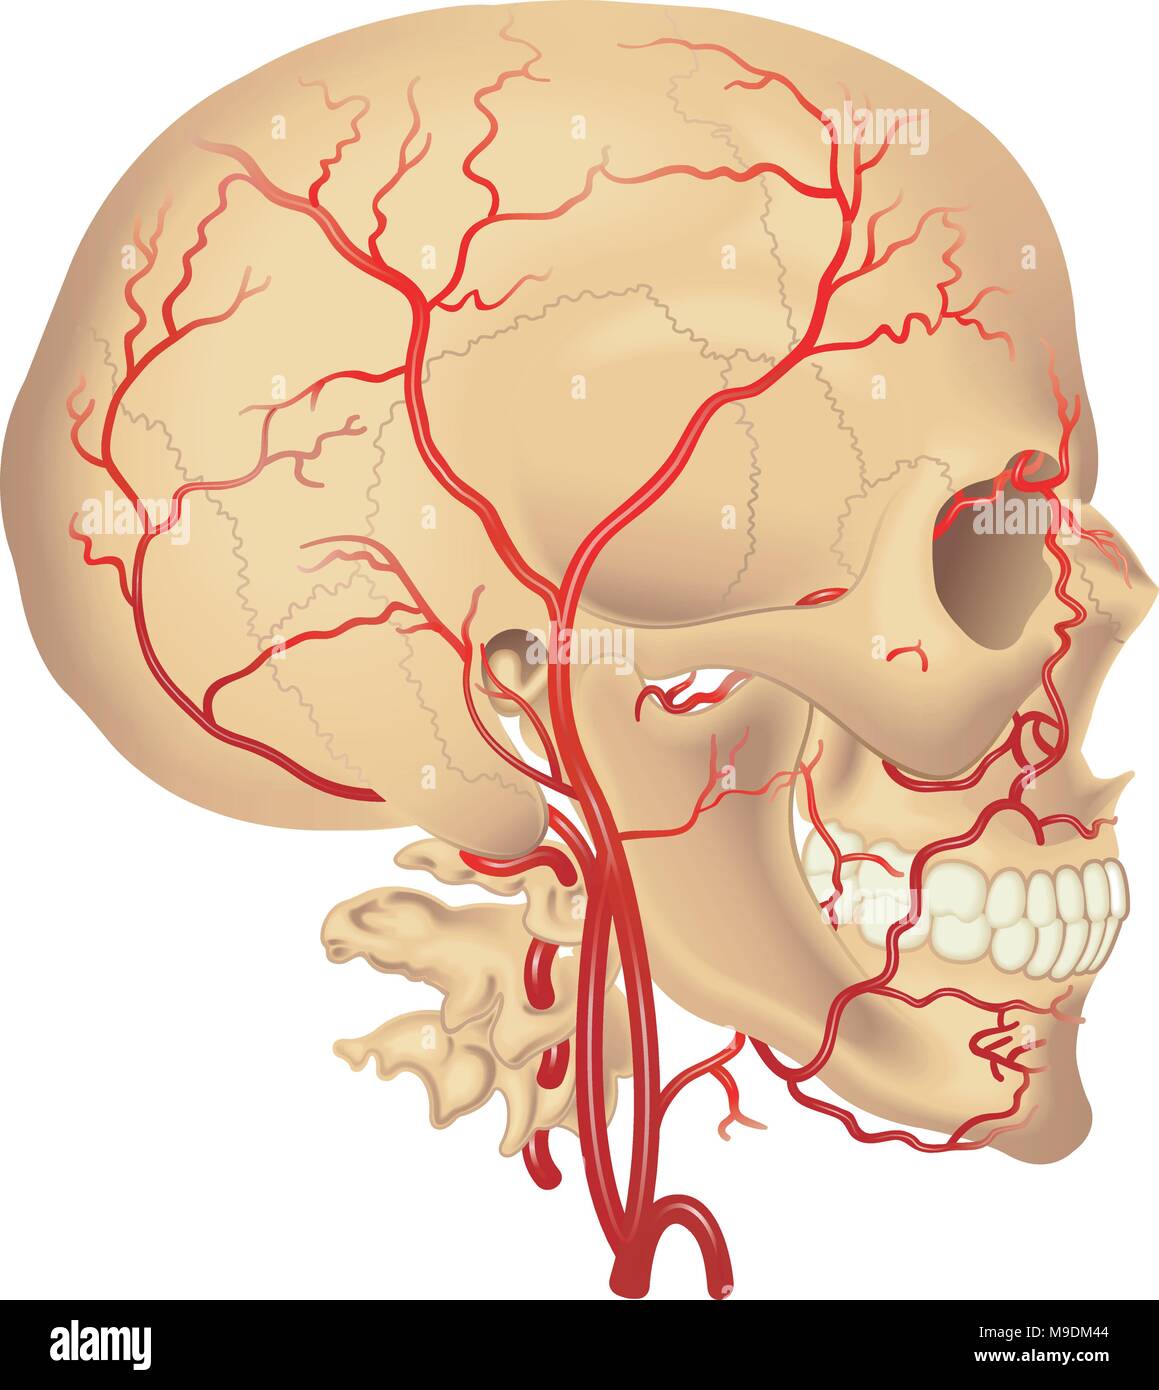 vector medical illustration of  distribution of the carotid artery Stock Vector